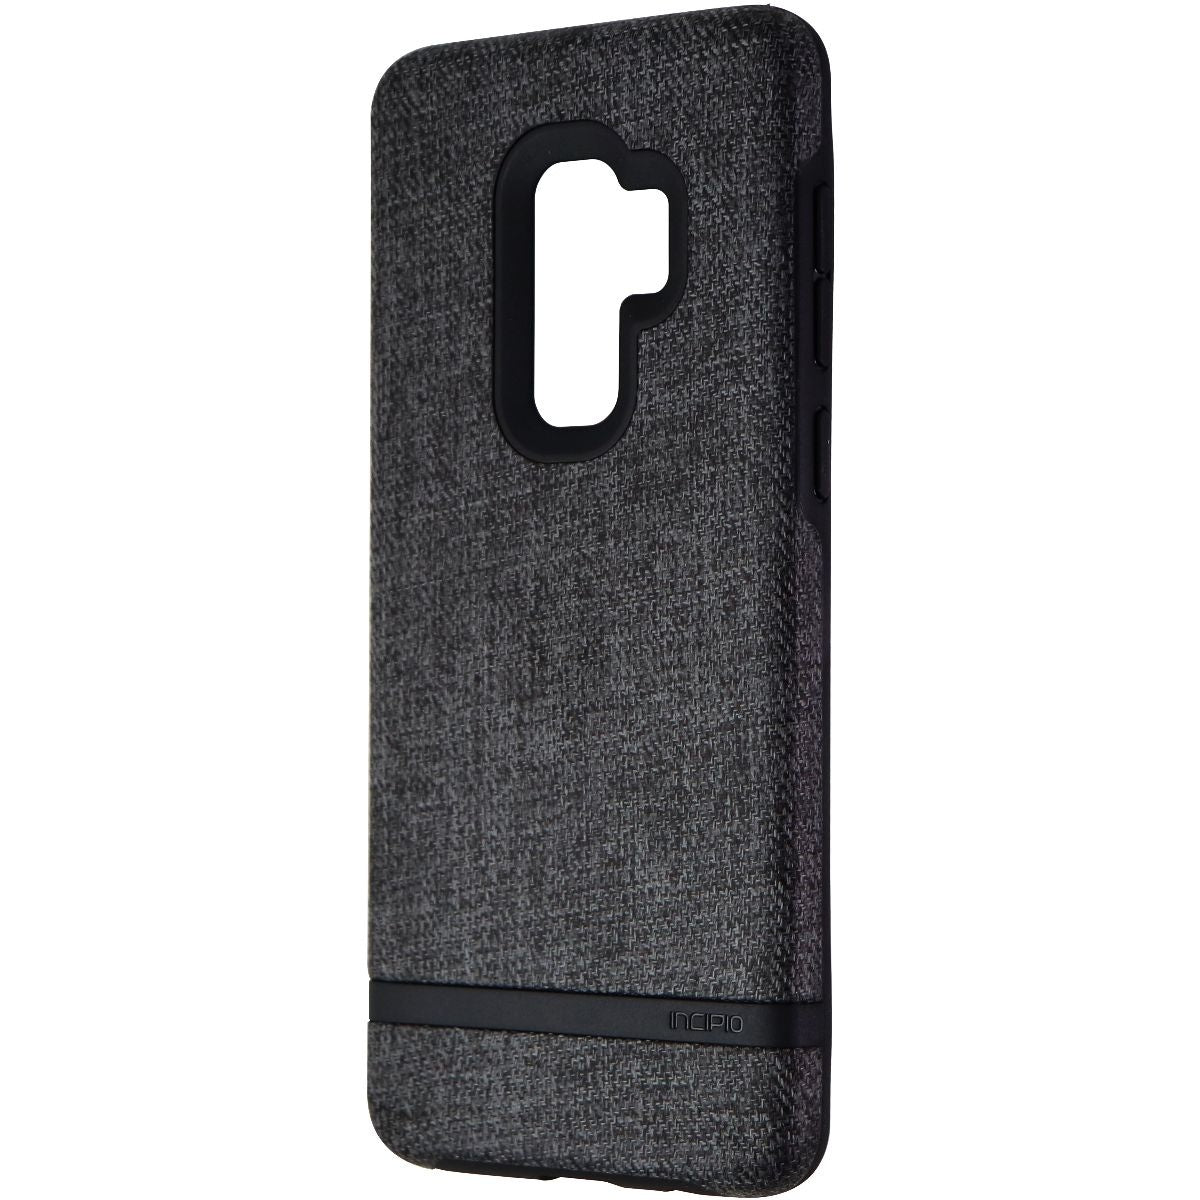 Incipio Esquire Hardshell Fabric Case for Galaxy S9+ (Plus) - Dark Gray/Black Cell Phone - Cases, Covers & Skins Incipio    - Simple Cell Bulk Wholesale Pricing - USA Seller